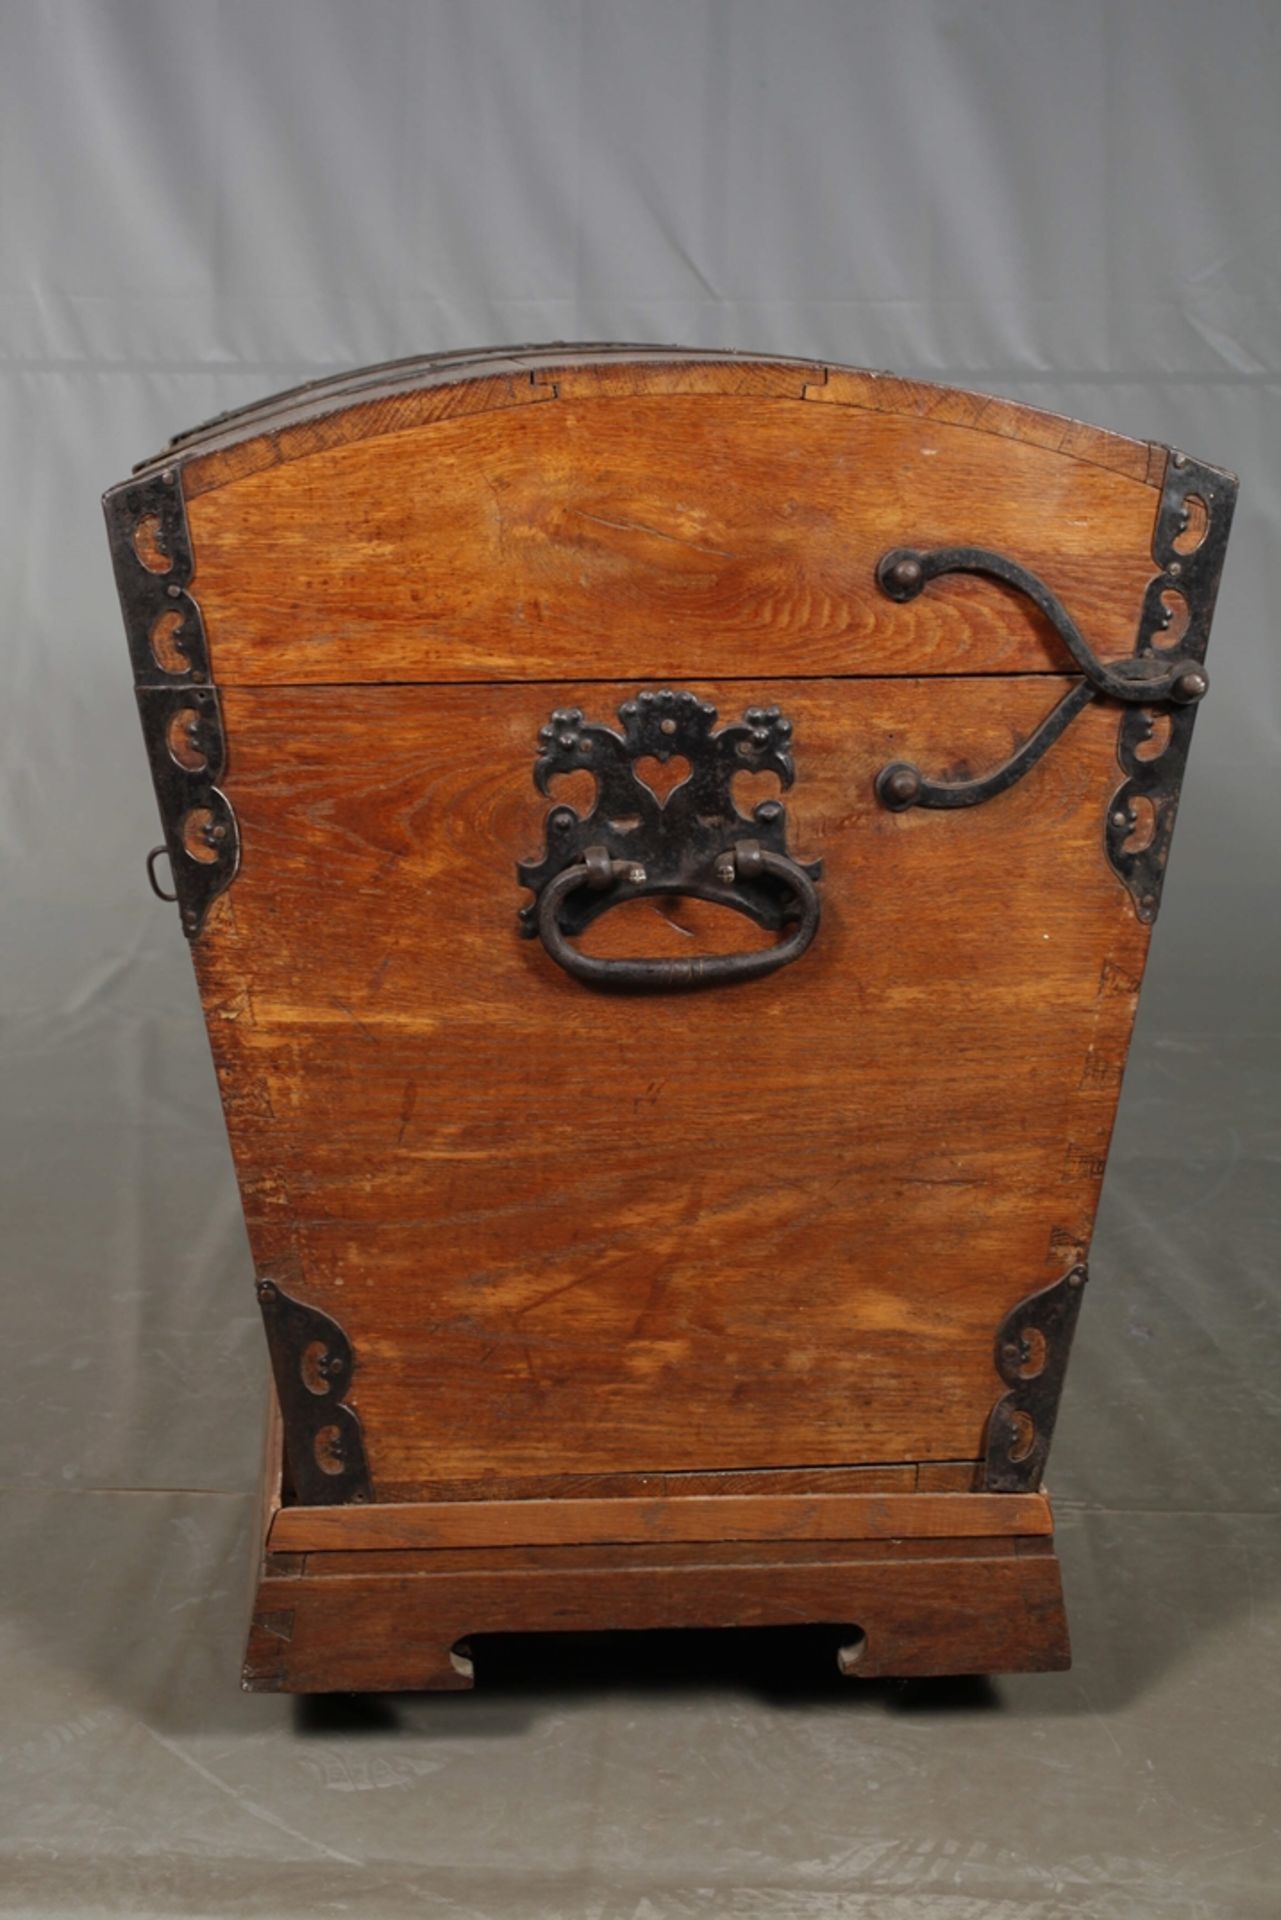 Round-lidded Baroque chest - Image 7 of 10